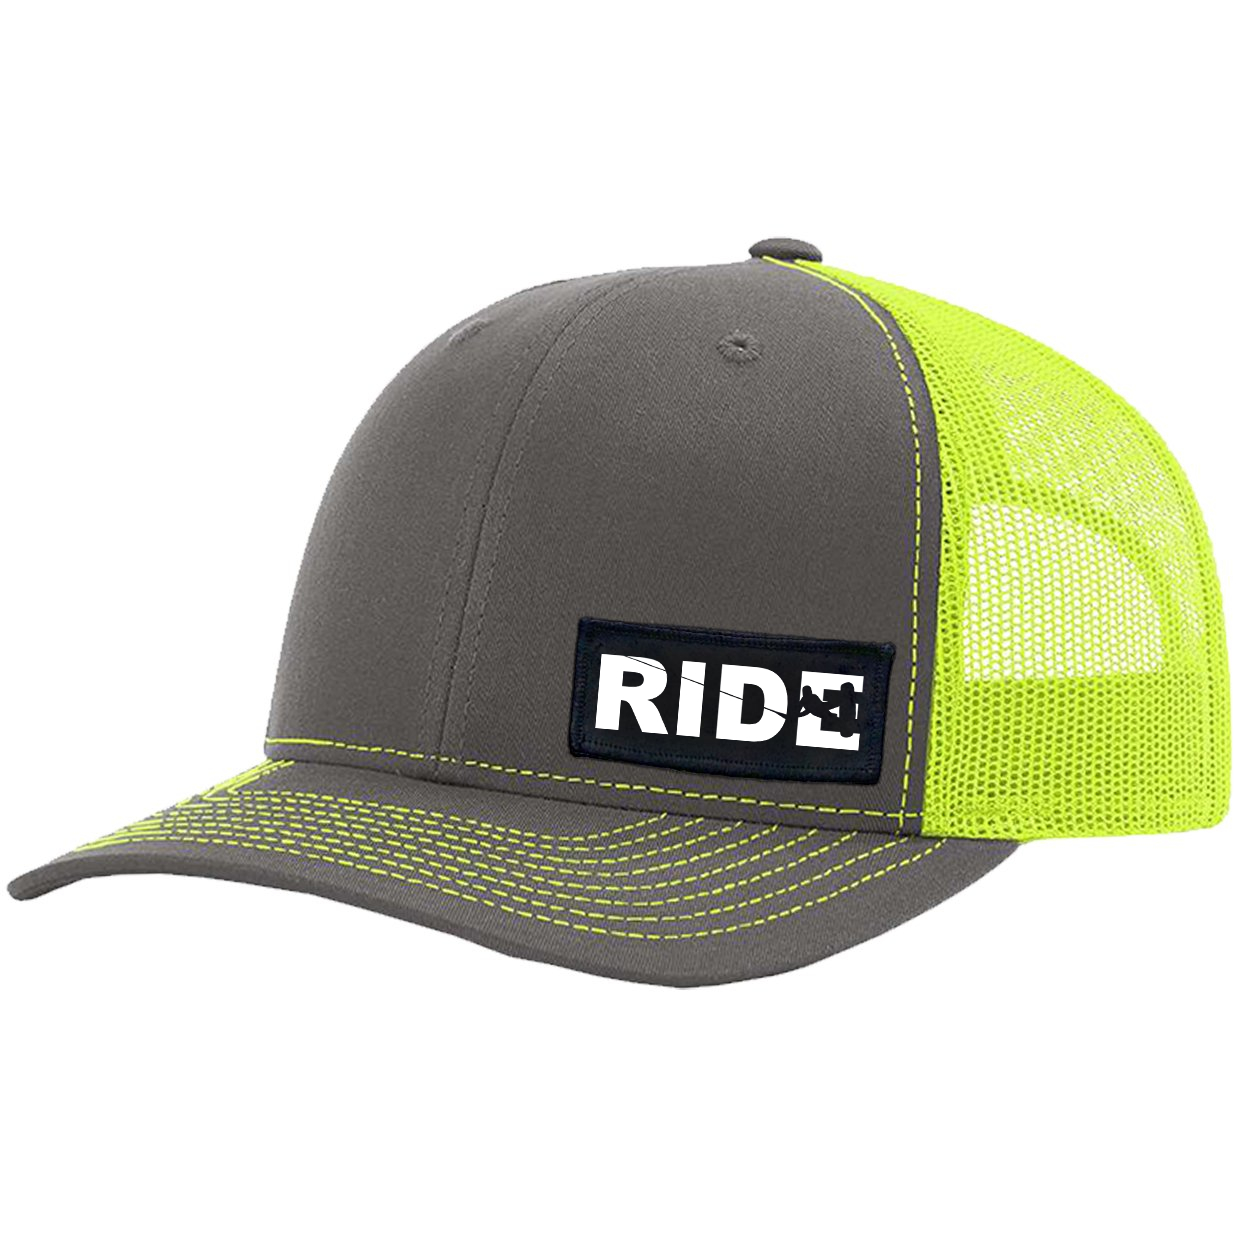 Ride Wakeboard Logo Night Out Woven Patch Snapback Trucker Hat Charcoal/Neon Yellow (White Logo)